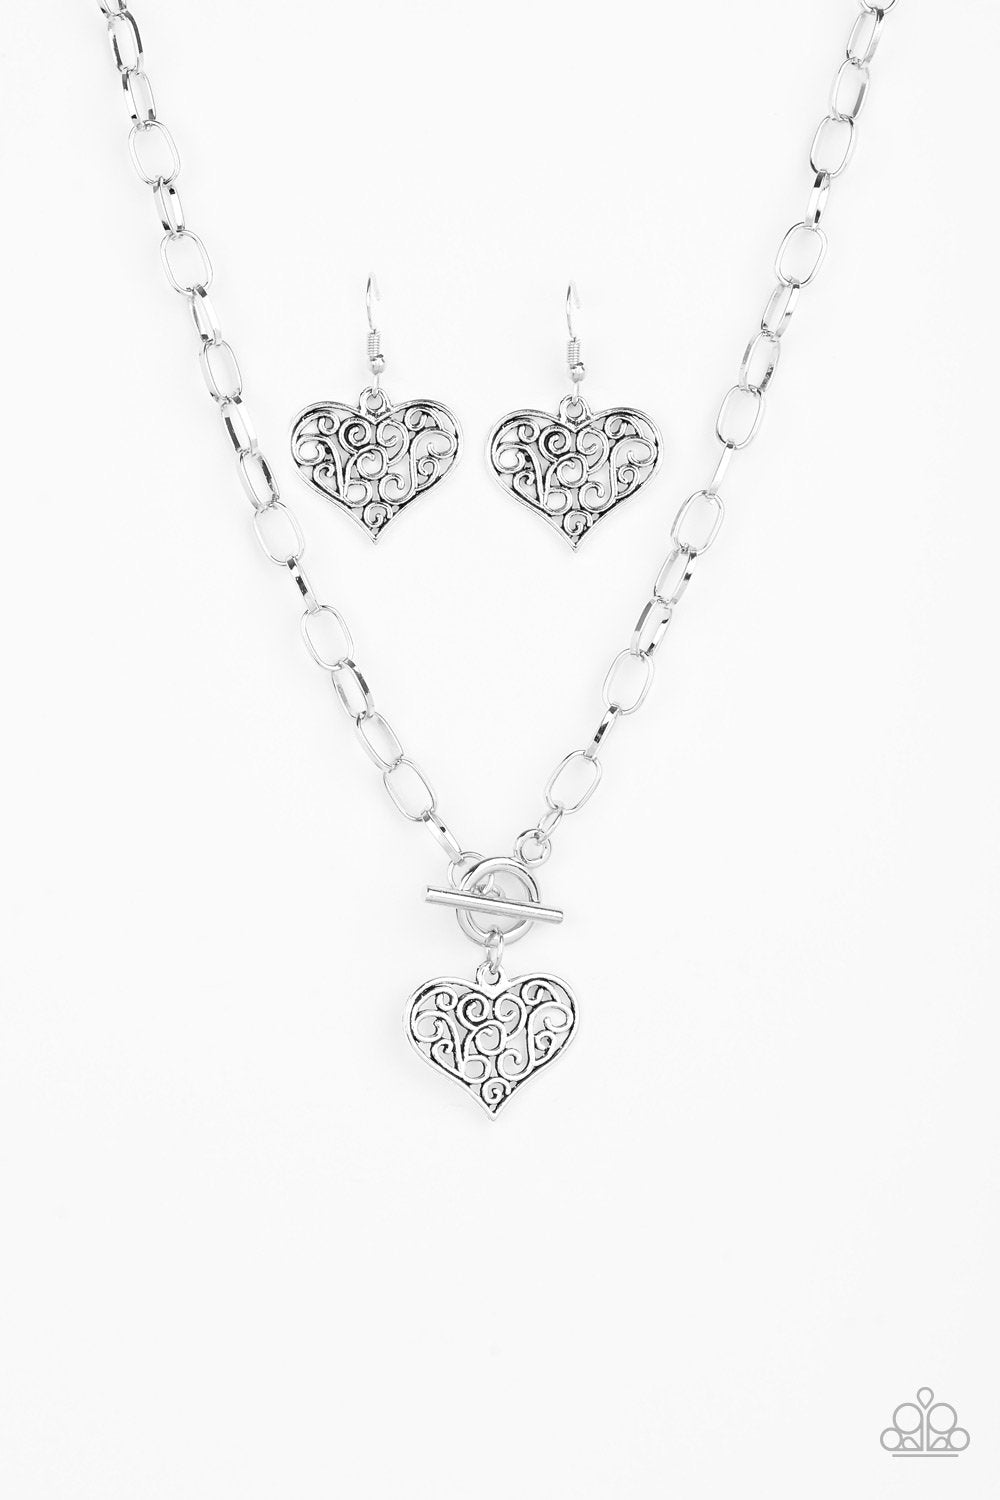 Heart Touching Harmony Silver Heart Necklace - Paparazzi Accessories-CarasShop.com - $5 Jewelry by Cara Jewels